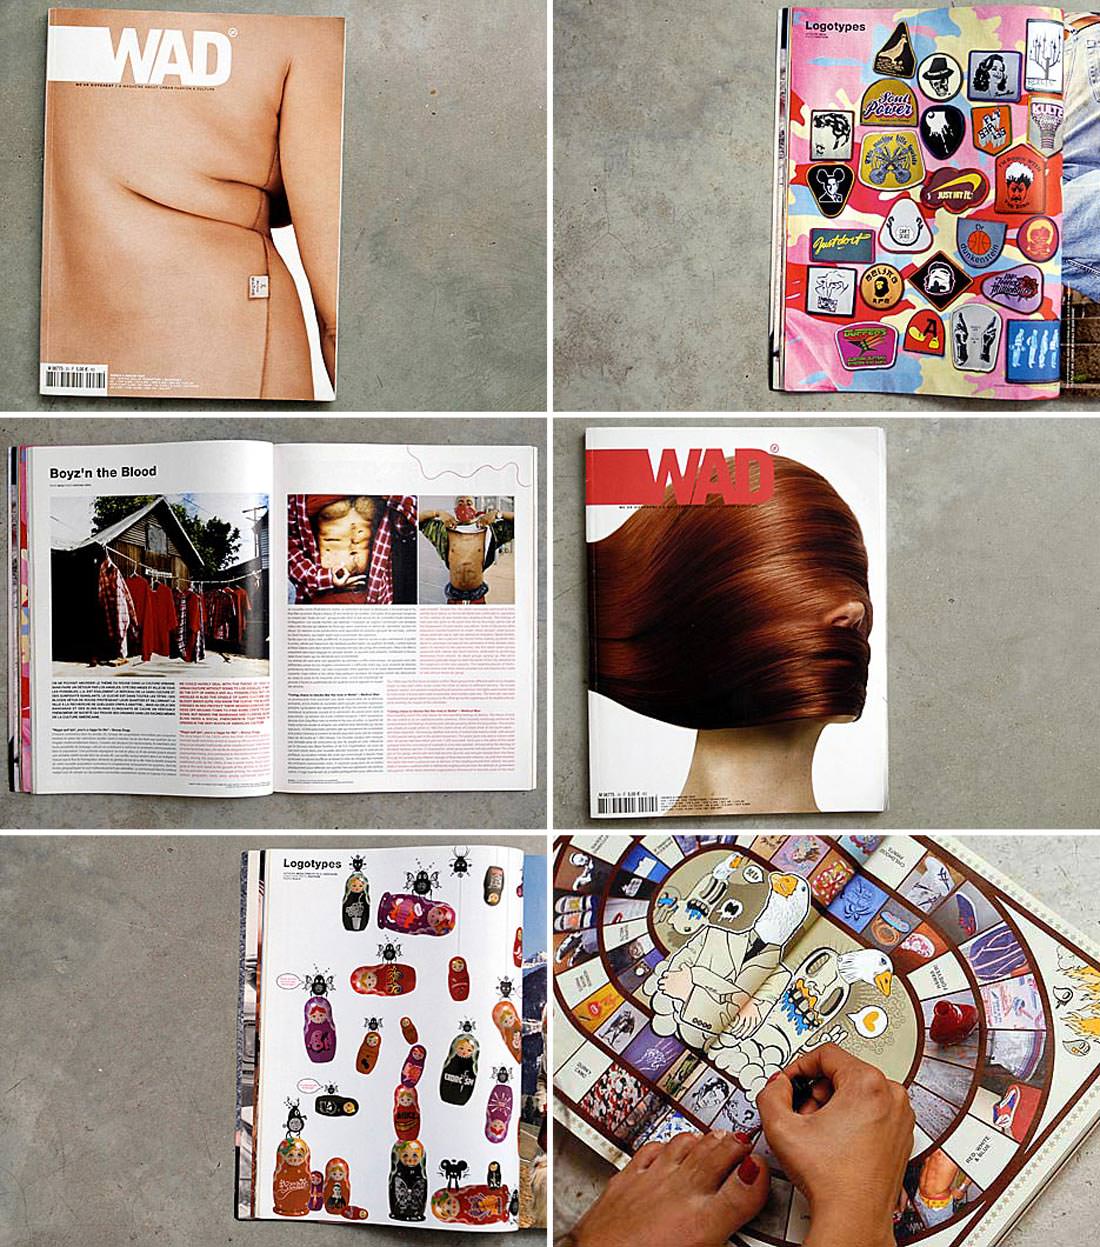 Example of pages and covers of WAD magazine